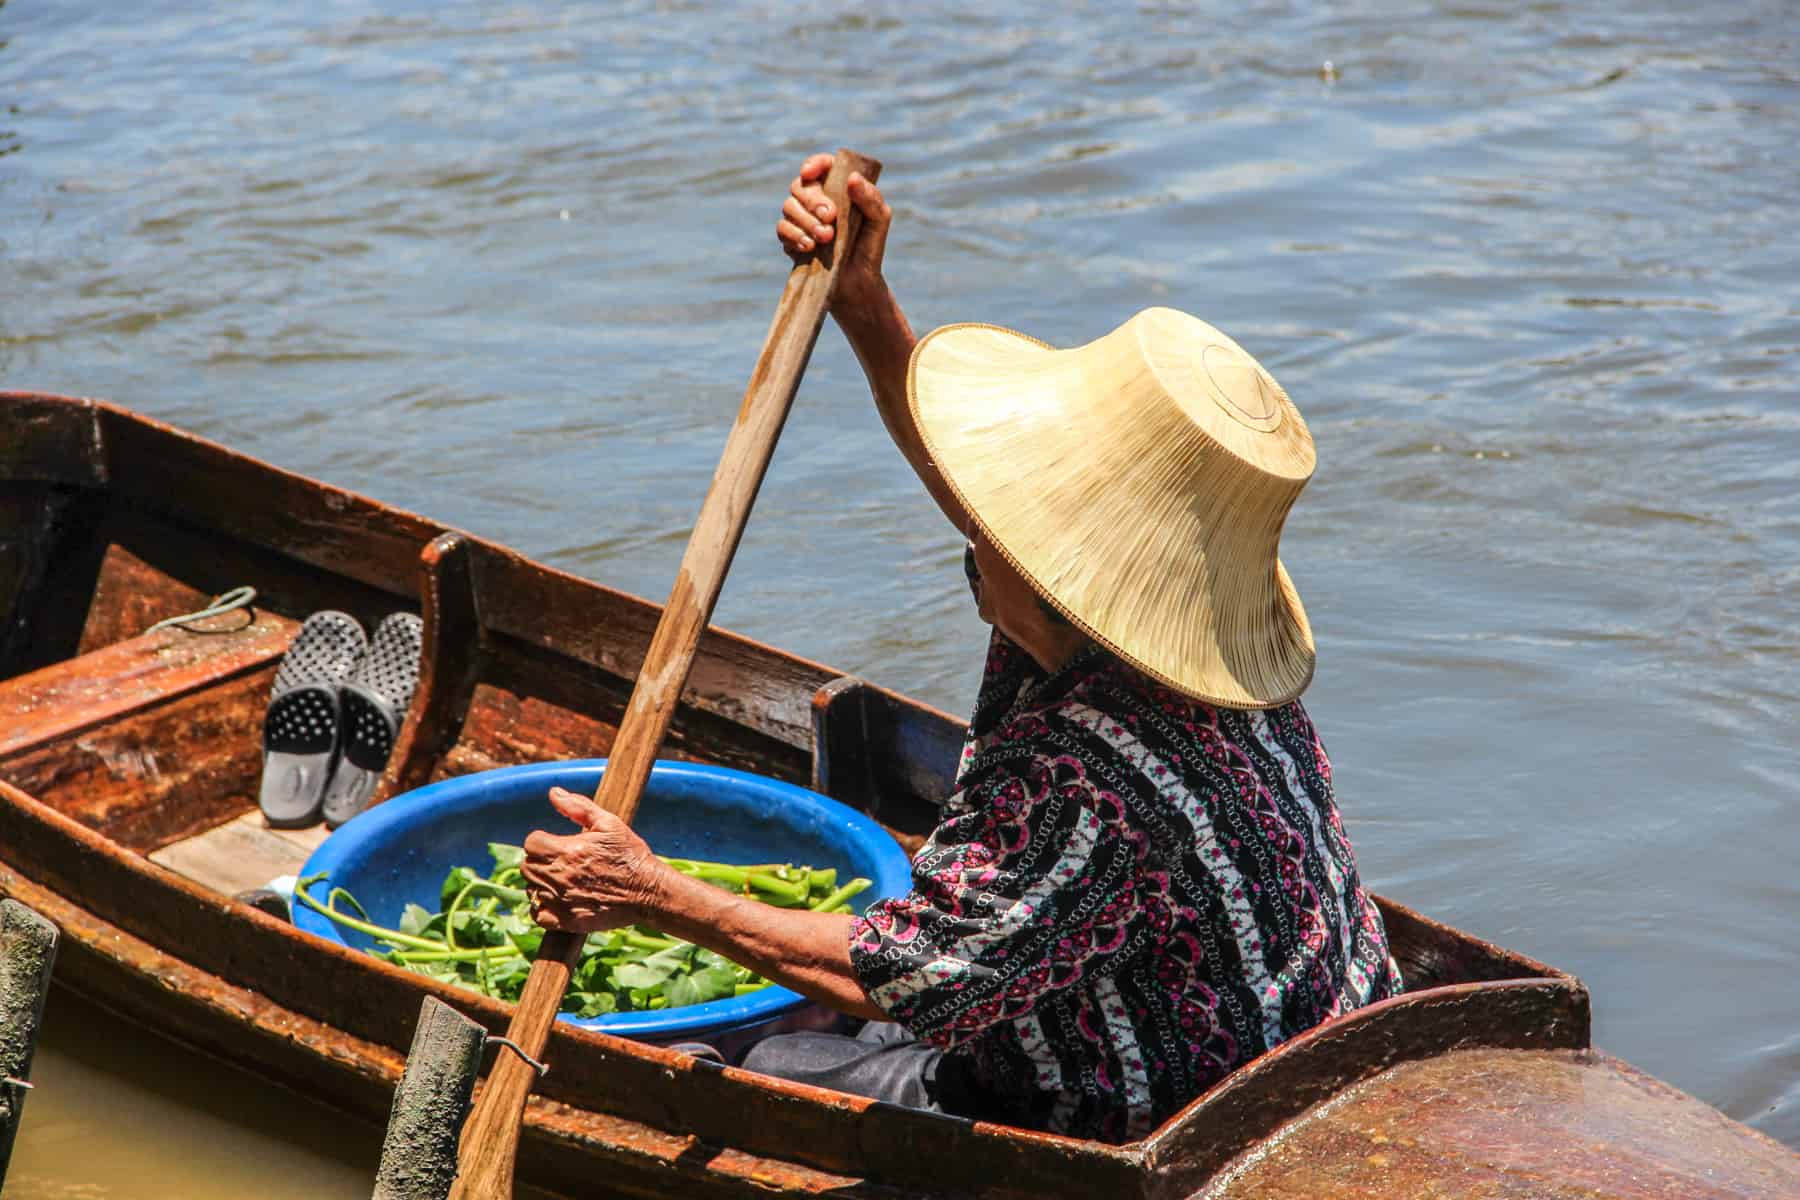 A Thai lady in a straw sun hat sells green vegetables from her wooden boat on the river in Bangkok